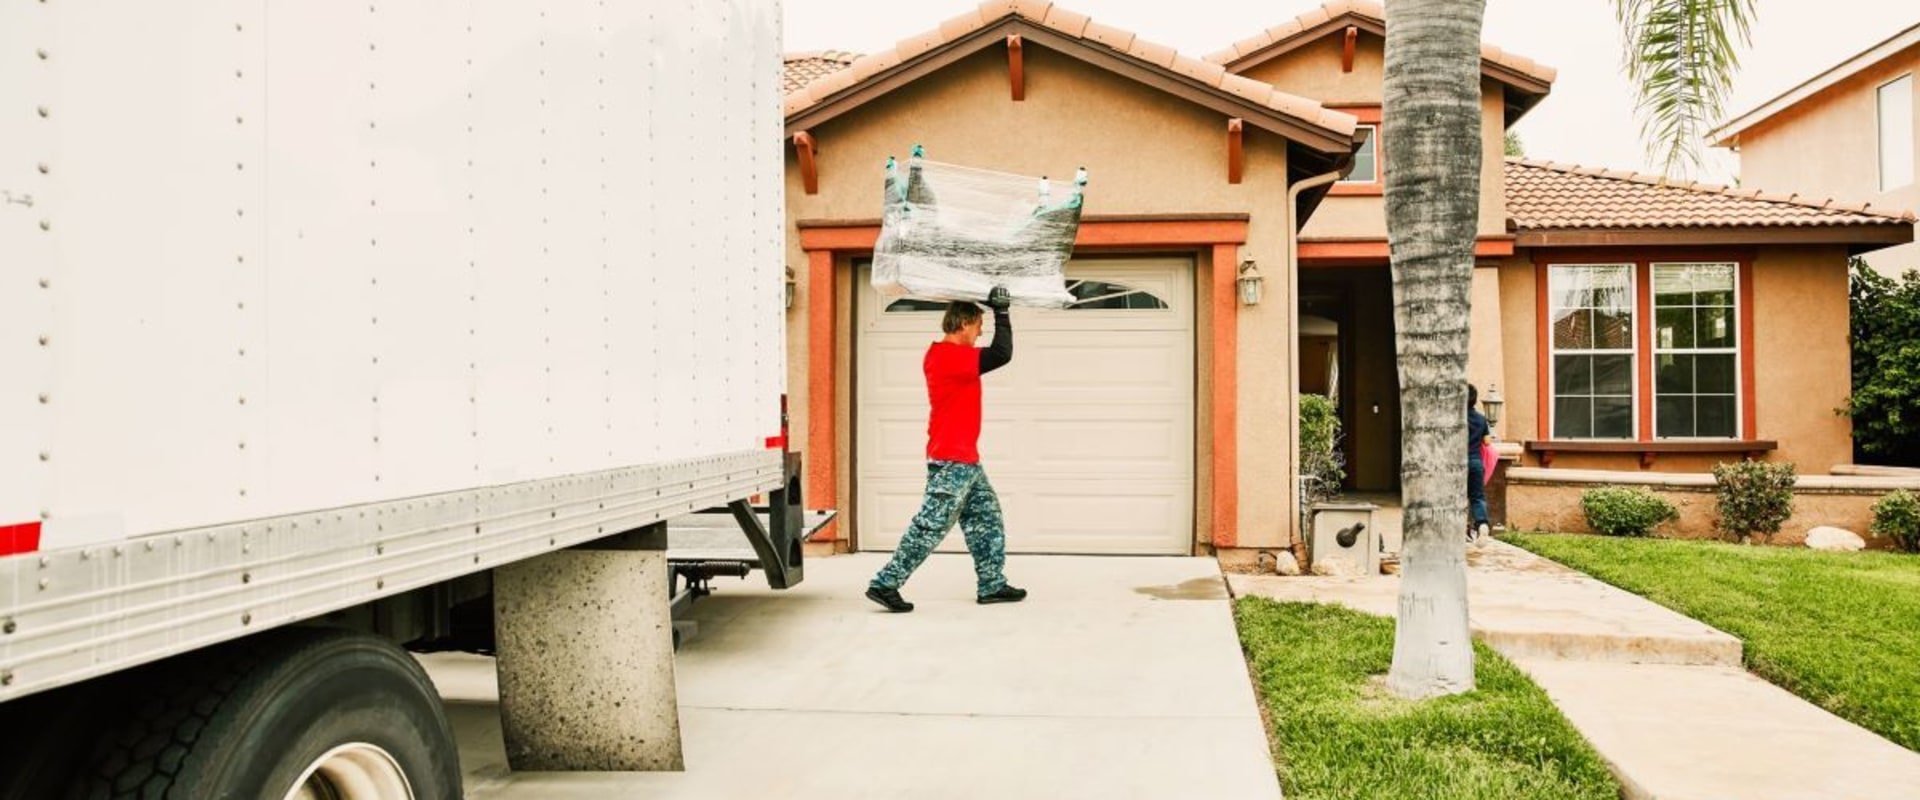 Does it take longer to load or unload a moving truck?